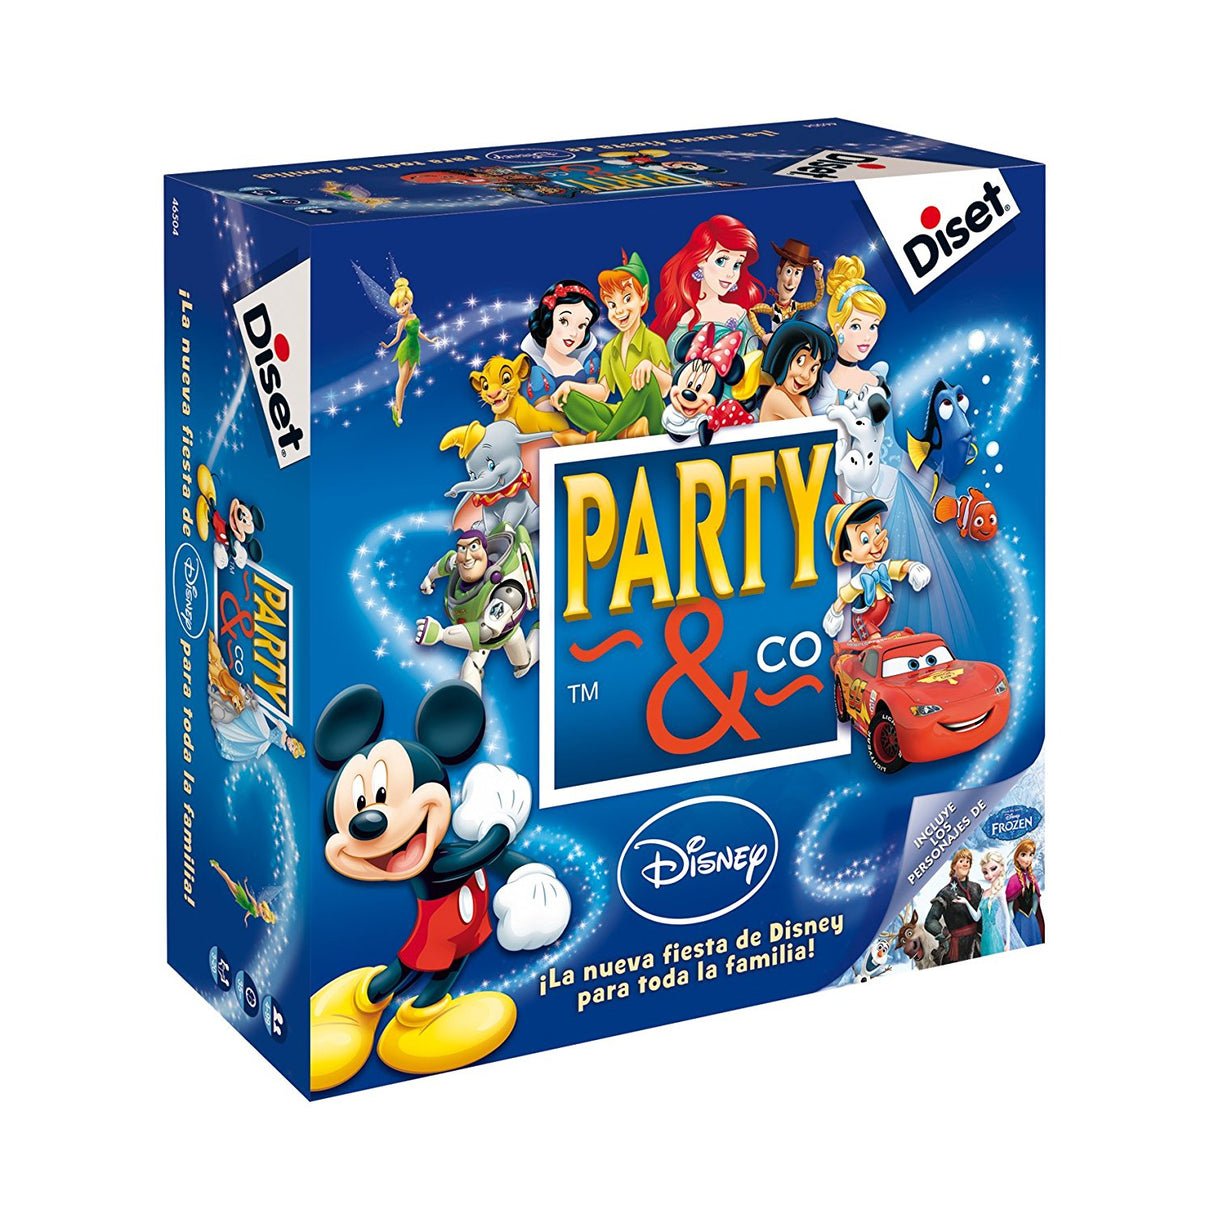 Party & Co Disney Channel